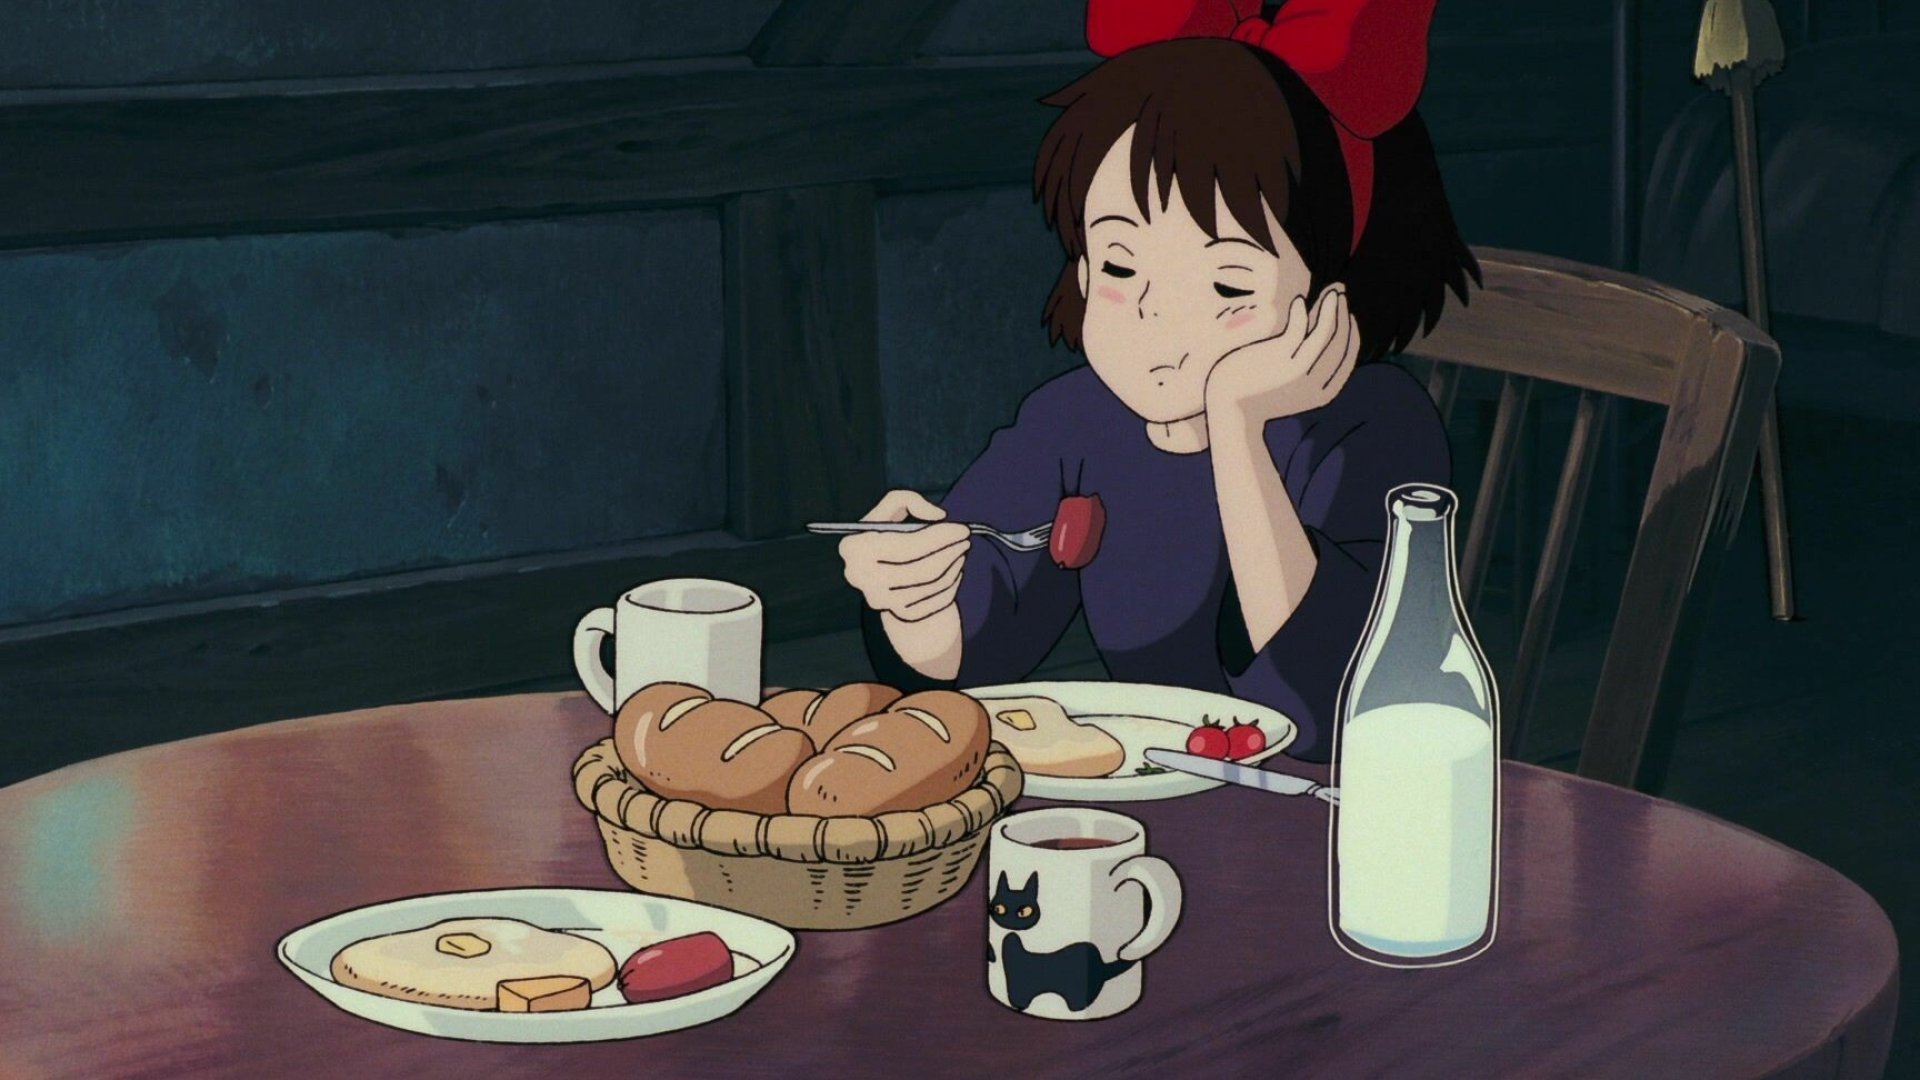 Kiki's Delivery Service: The movie is adapted from Majo no Takkyubin, a 1985 children’s book written by Eiko Kadono. 1920x1080 Full HD Wallpaper.